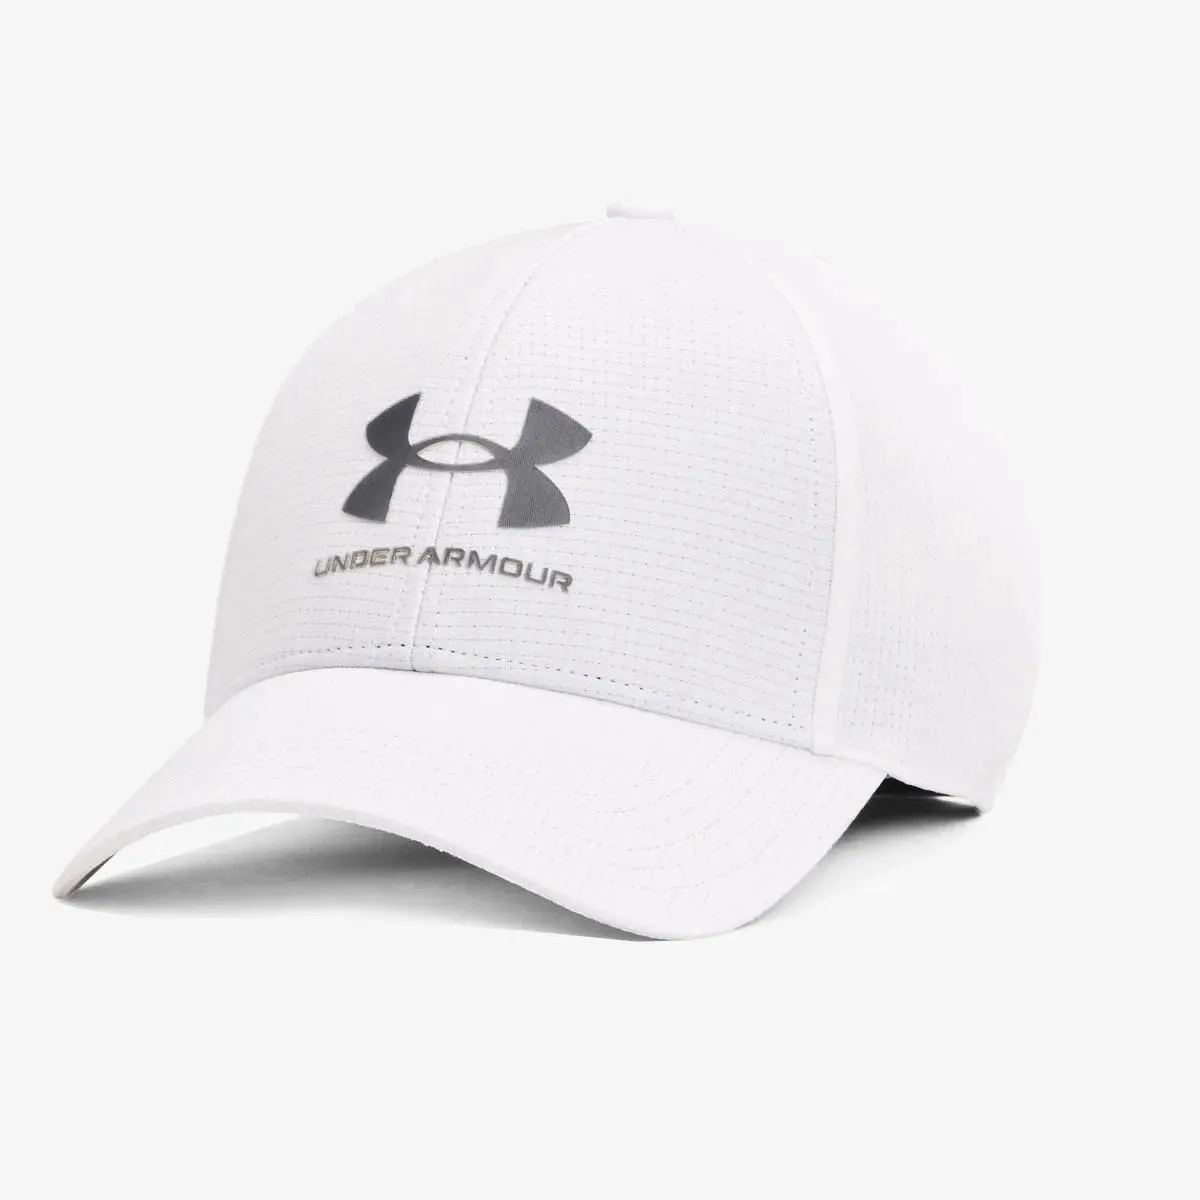 Under Armour Isochill ArmourVent™ 